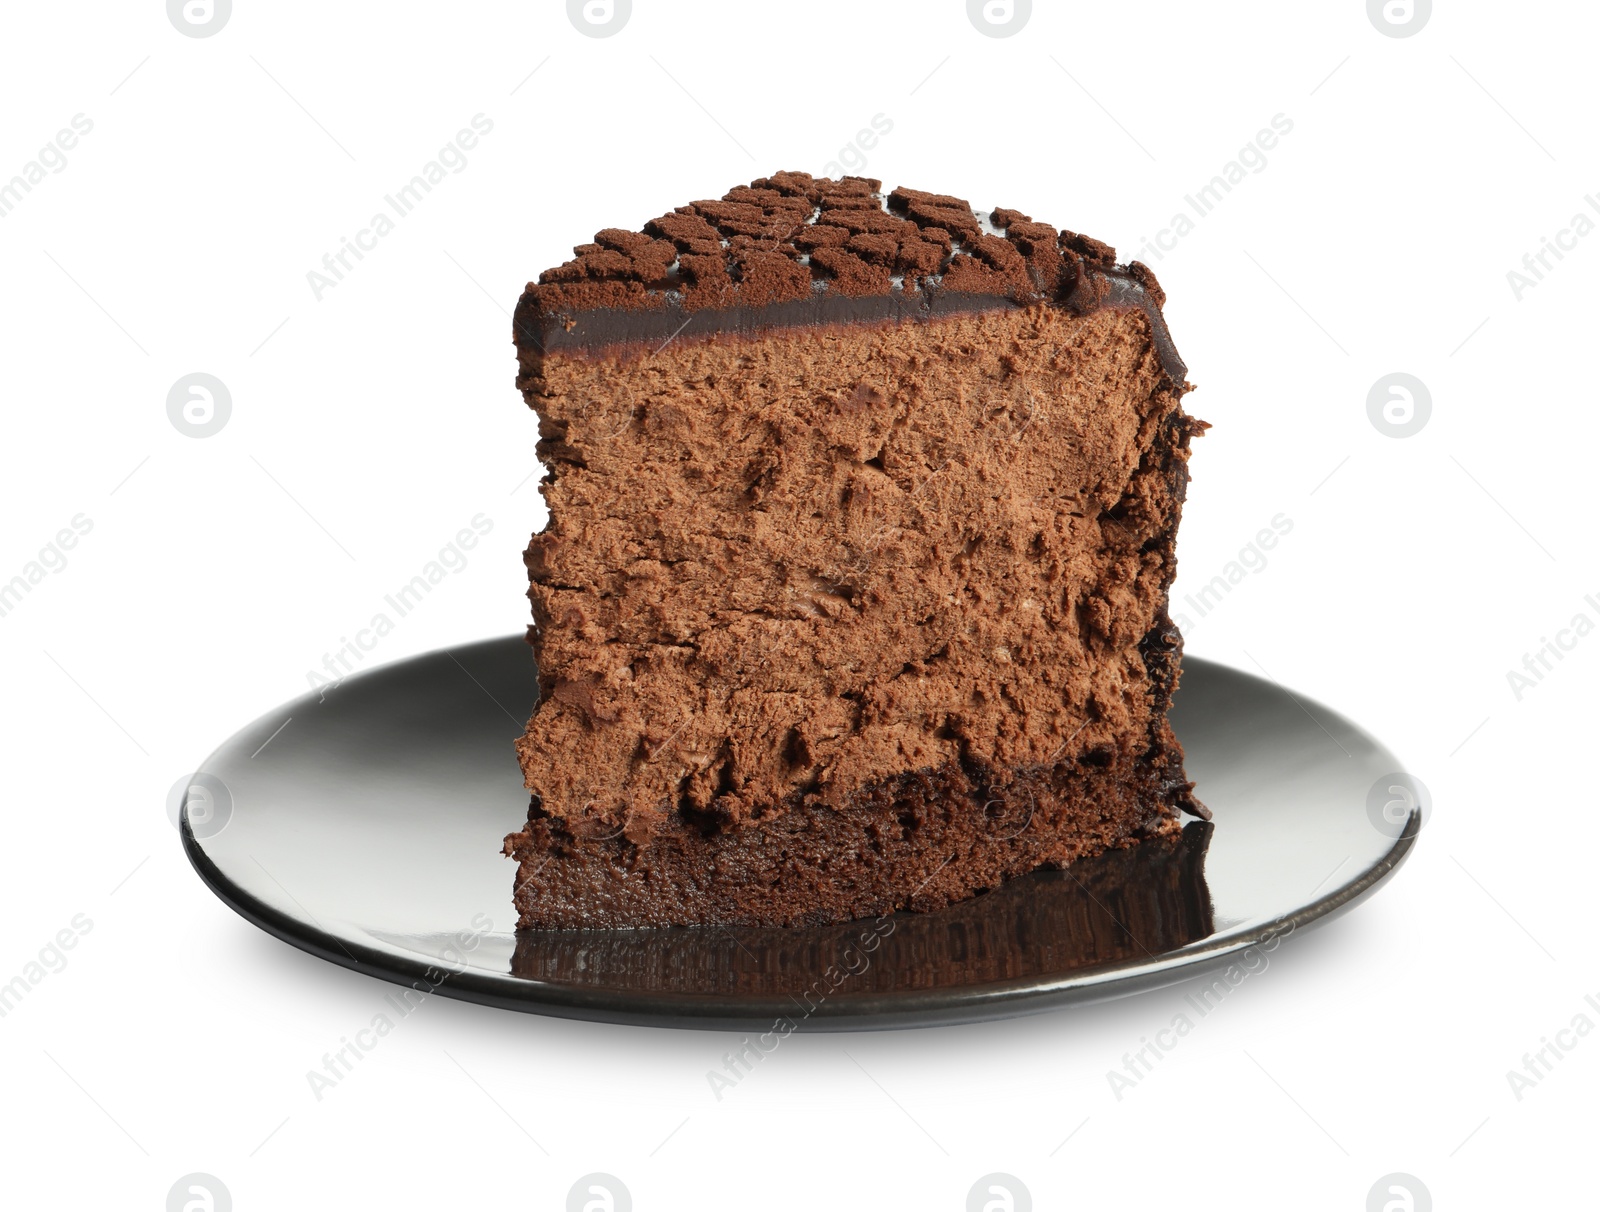 Photo of Piece of delicious chocolate truffle cake isolated on white